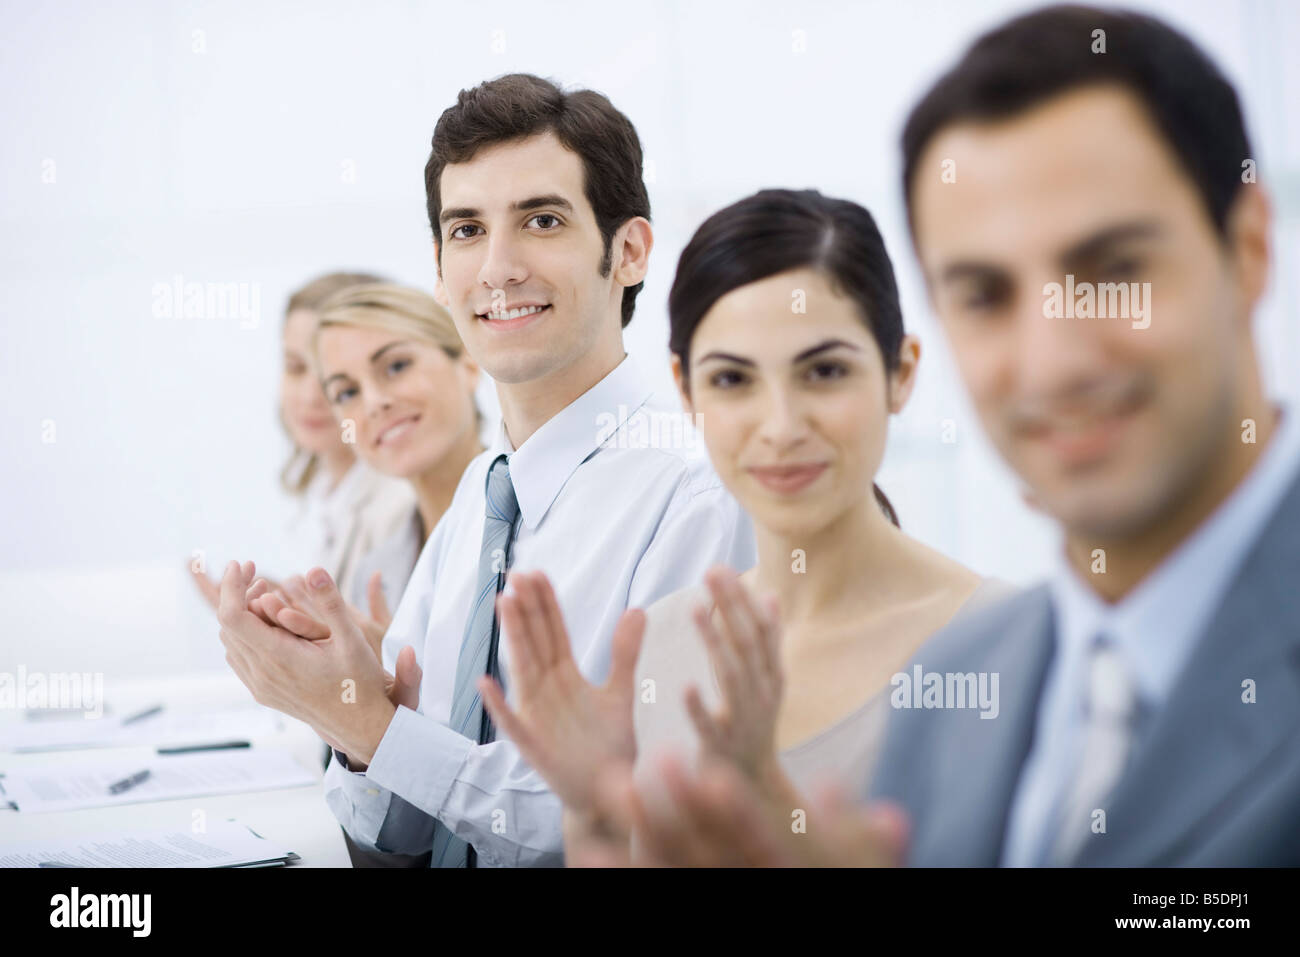 Group of professionals clapping, smiling at camera Stock Photo